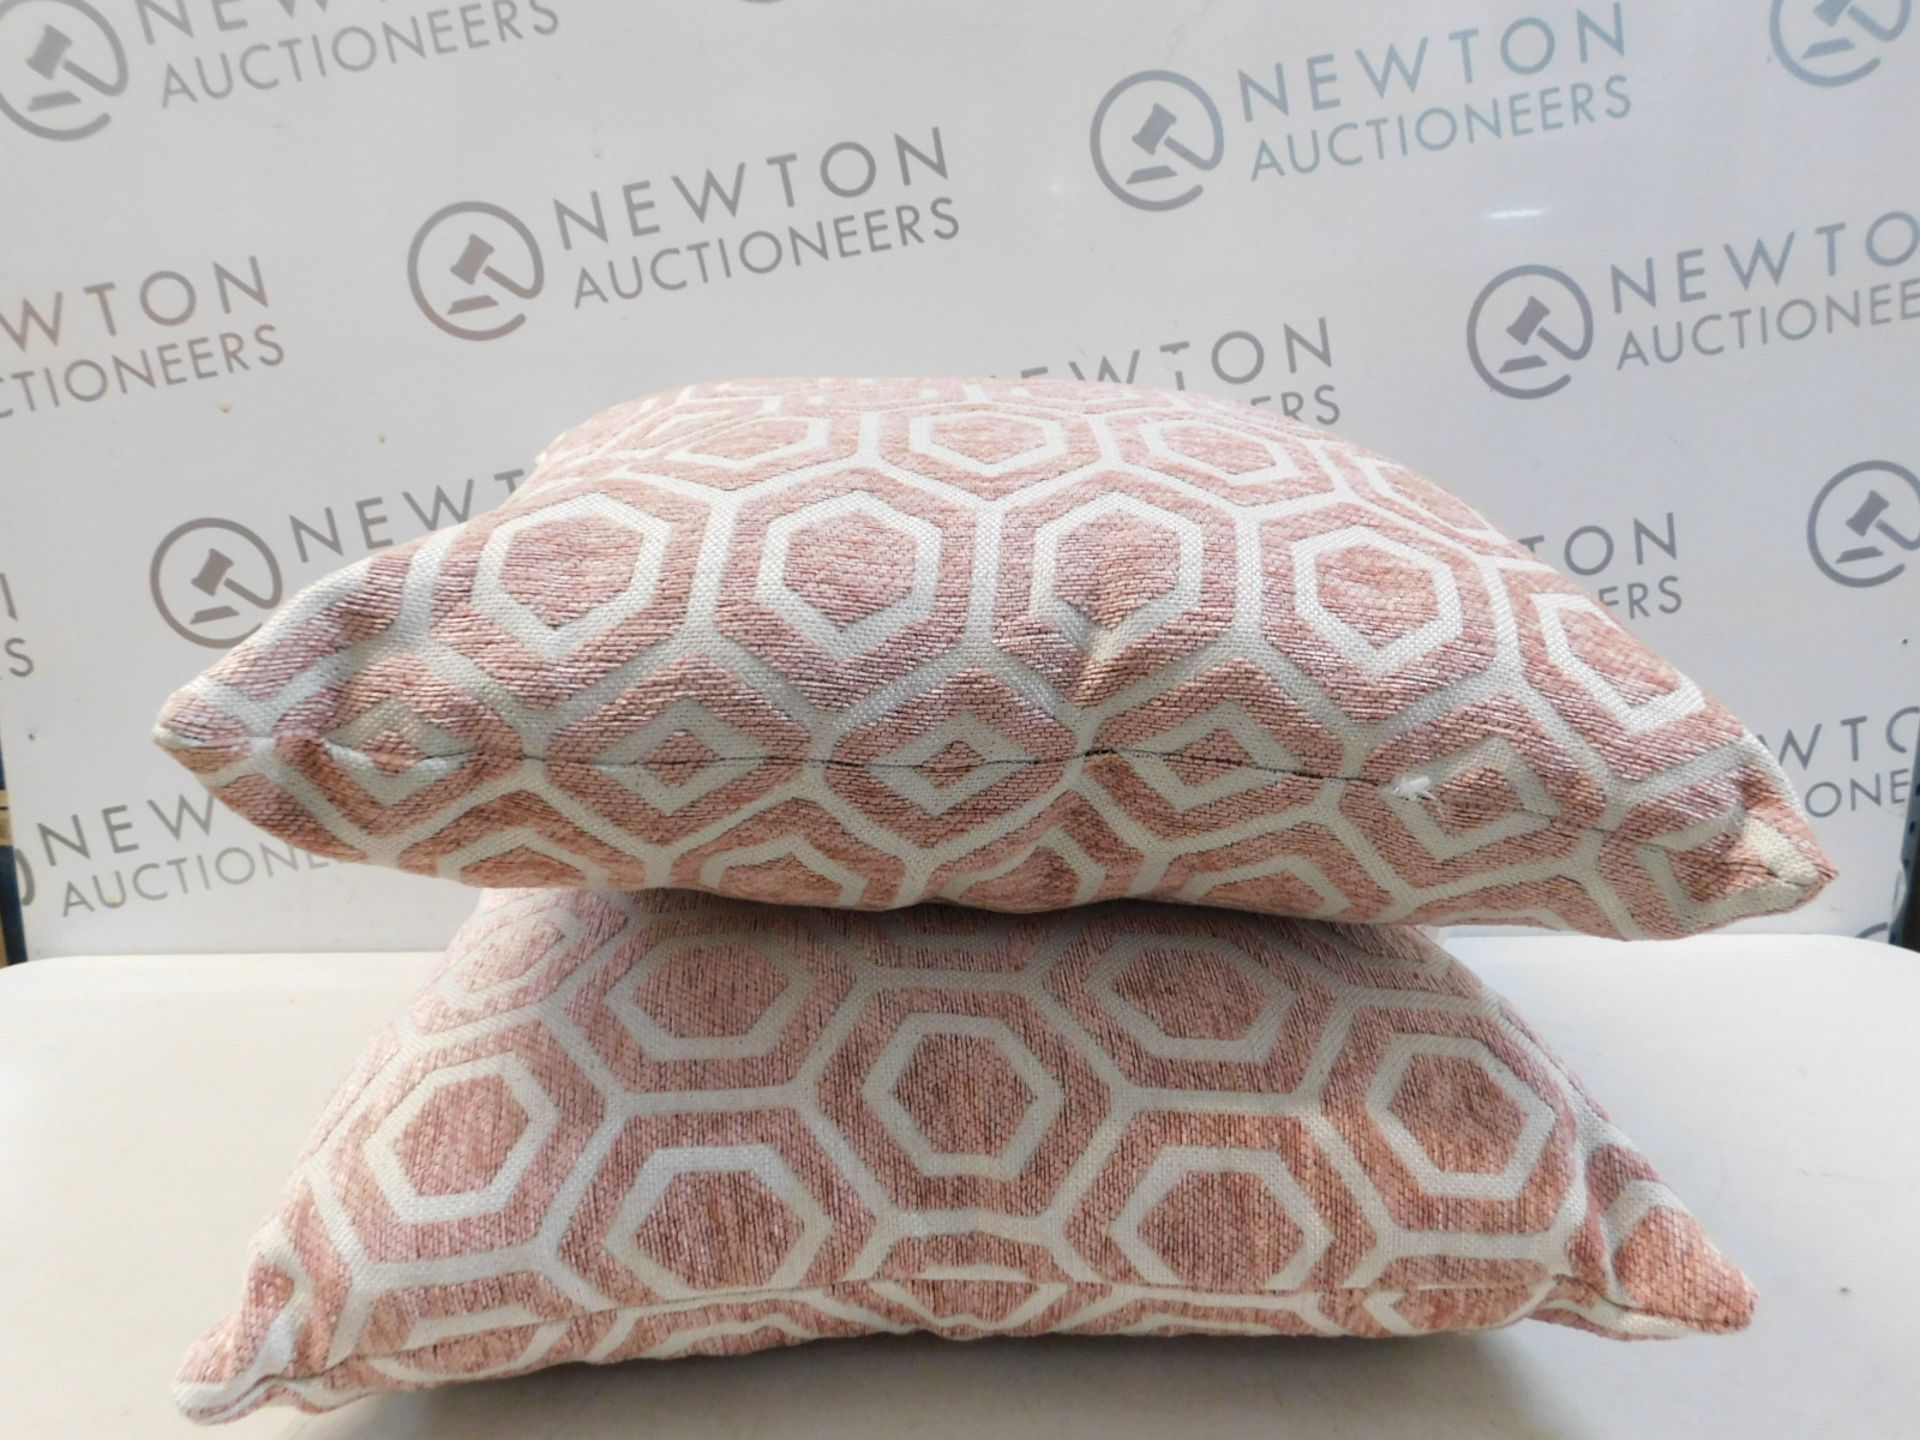 2 ARLEE HOME FASHIONS PINK PATTERNED DESIGNER CUSHIONS RRP £29.99